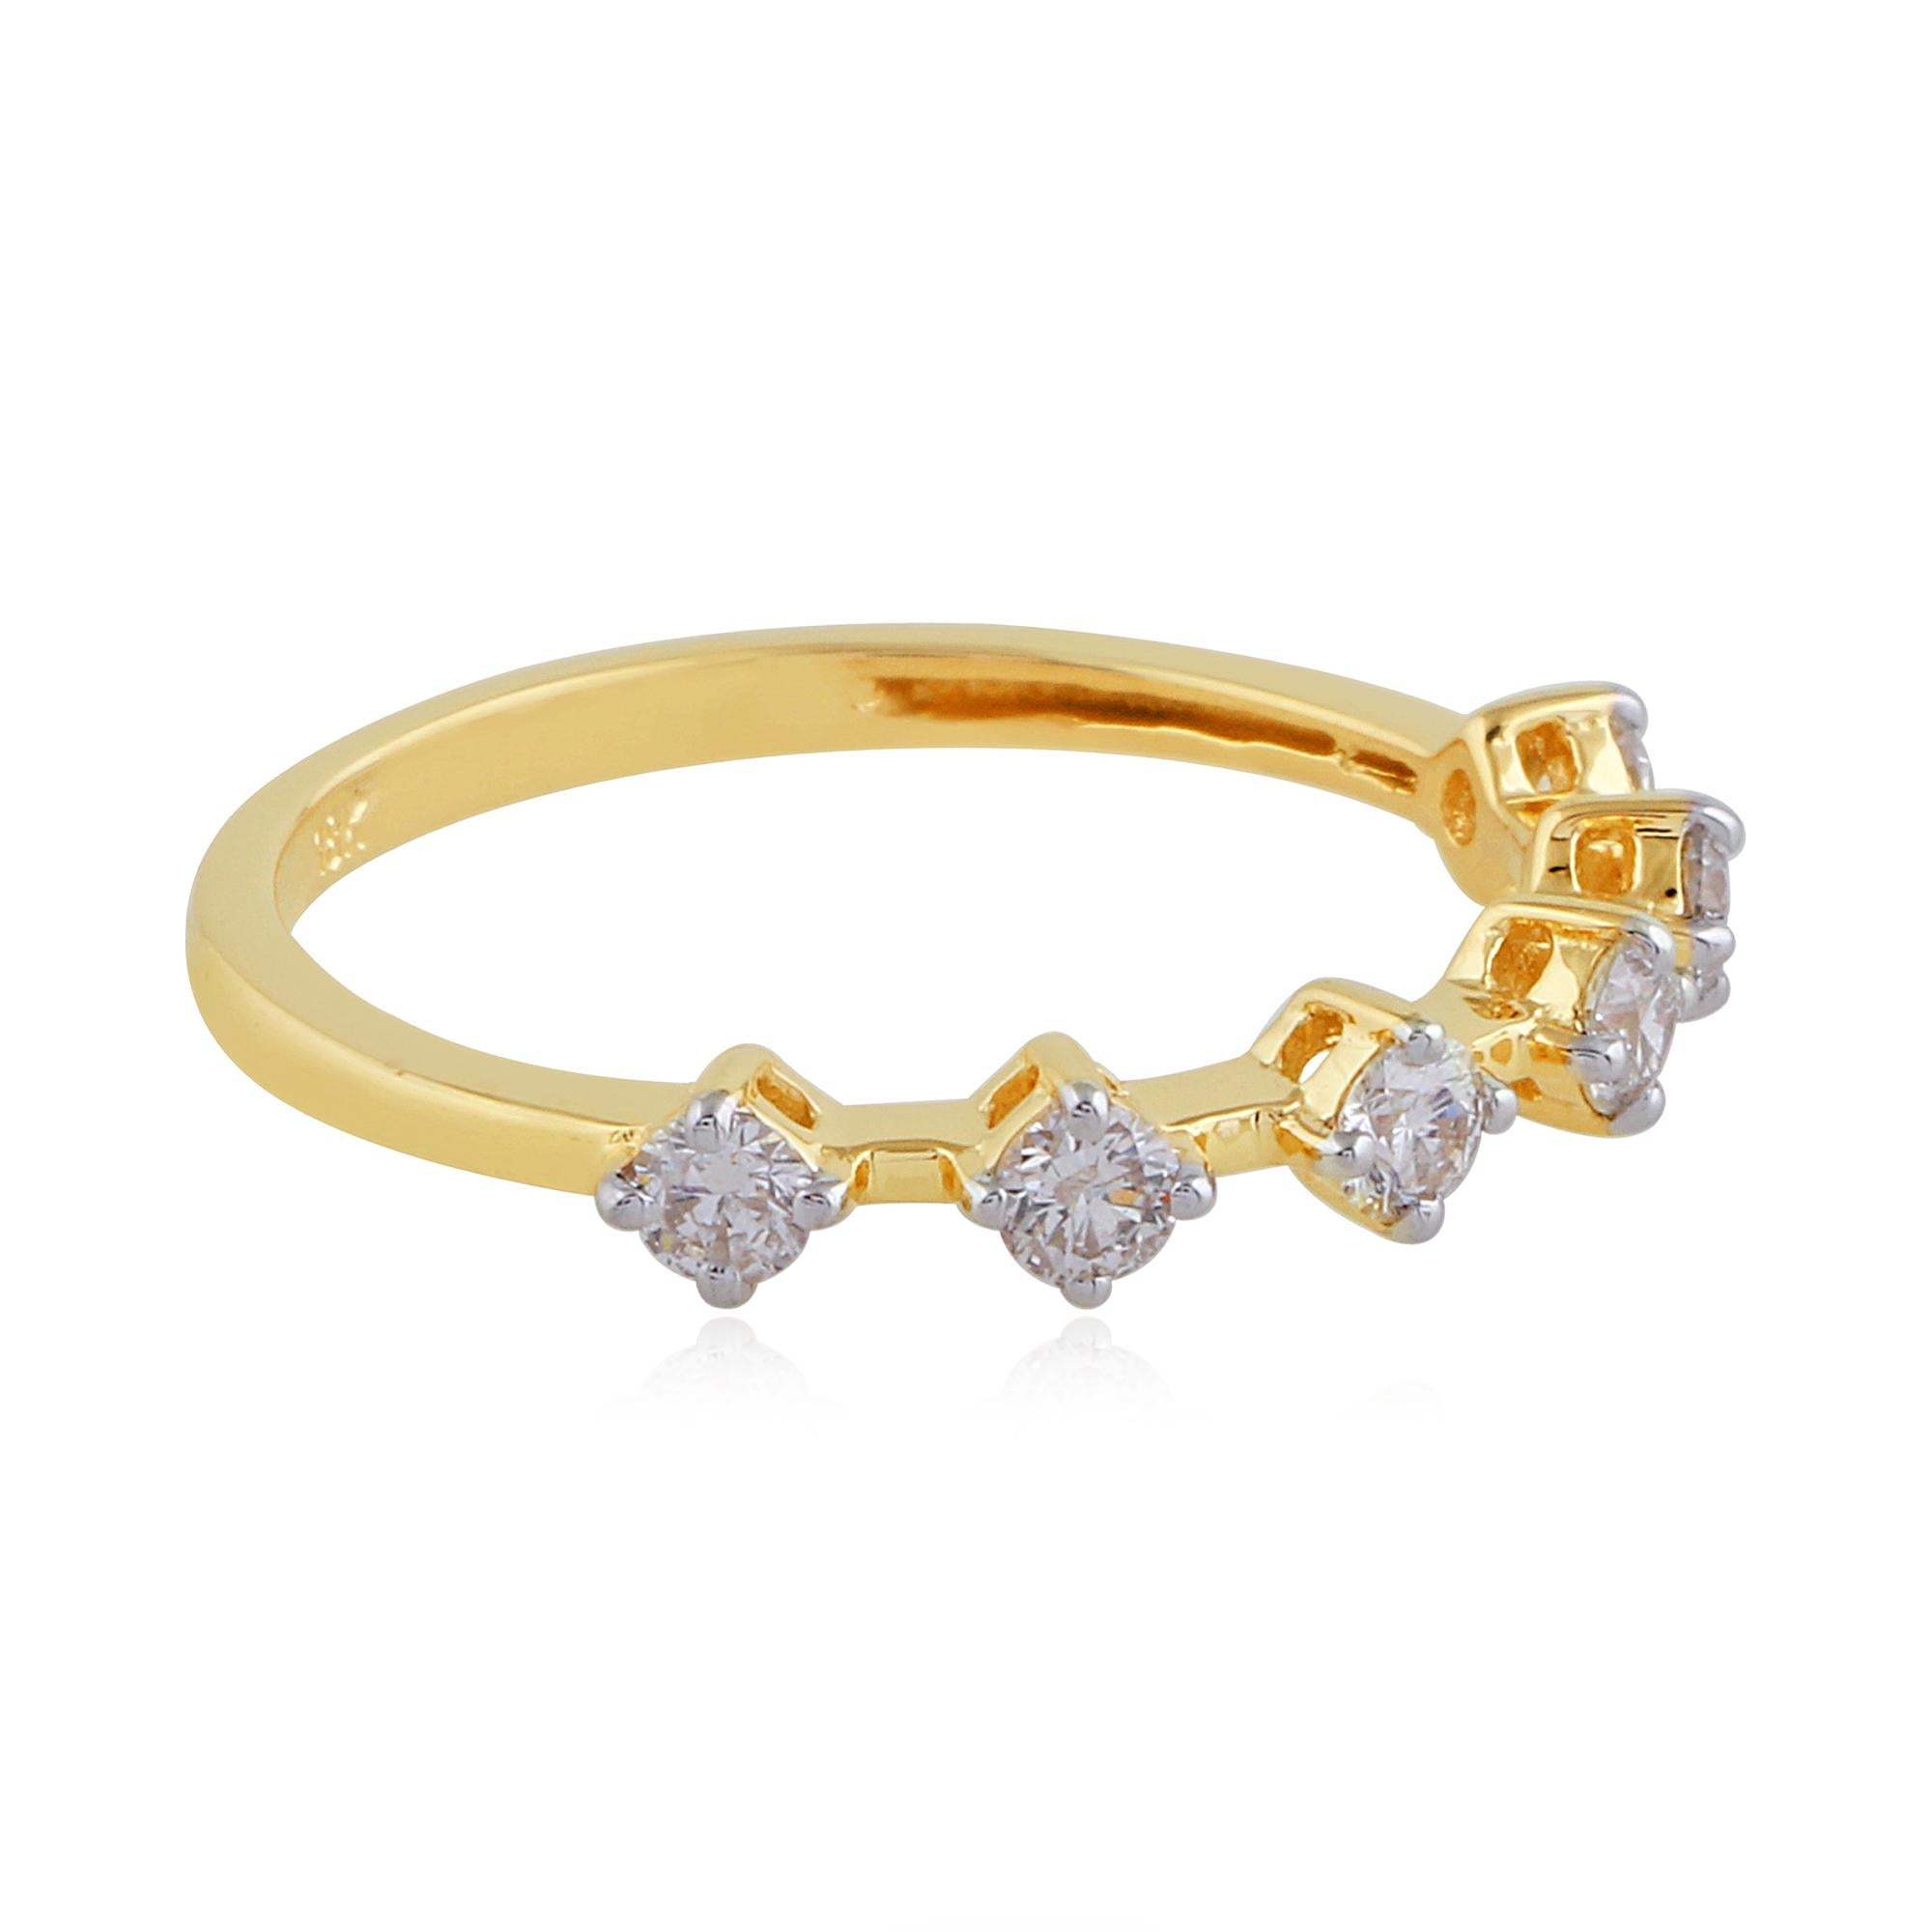 For Sale:  0.45 Carat SI Clarity HI Color Diamond Band Ring Solid 18k Yellow Gold Jewelry 2